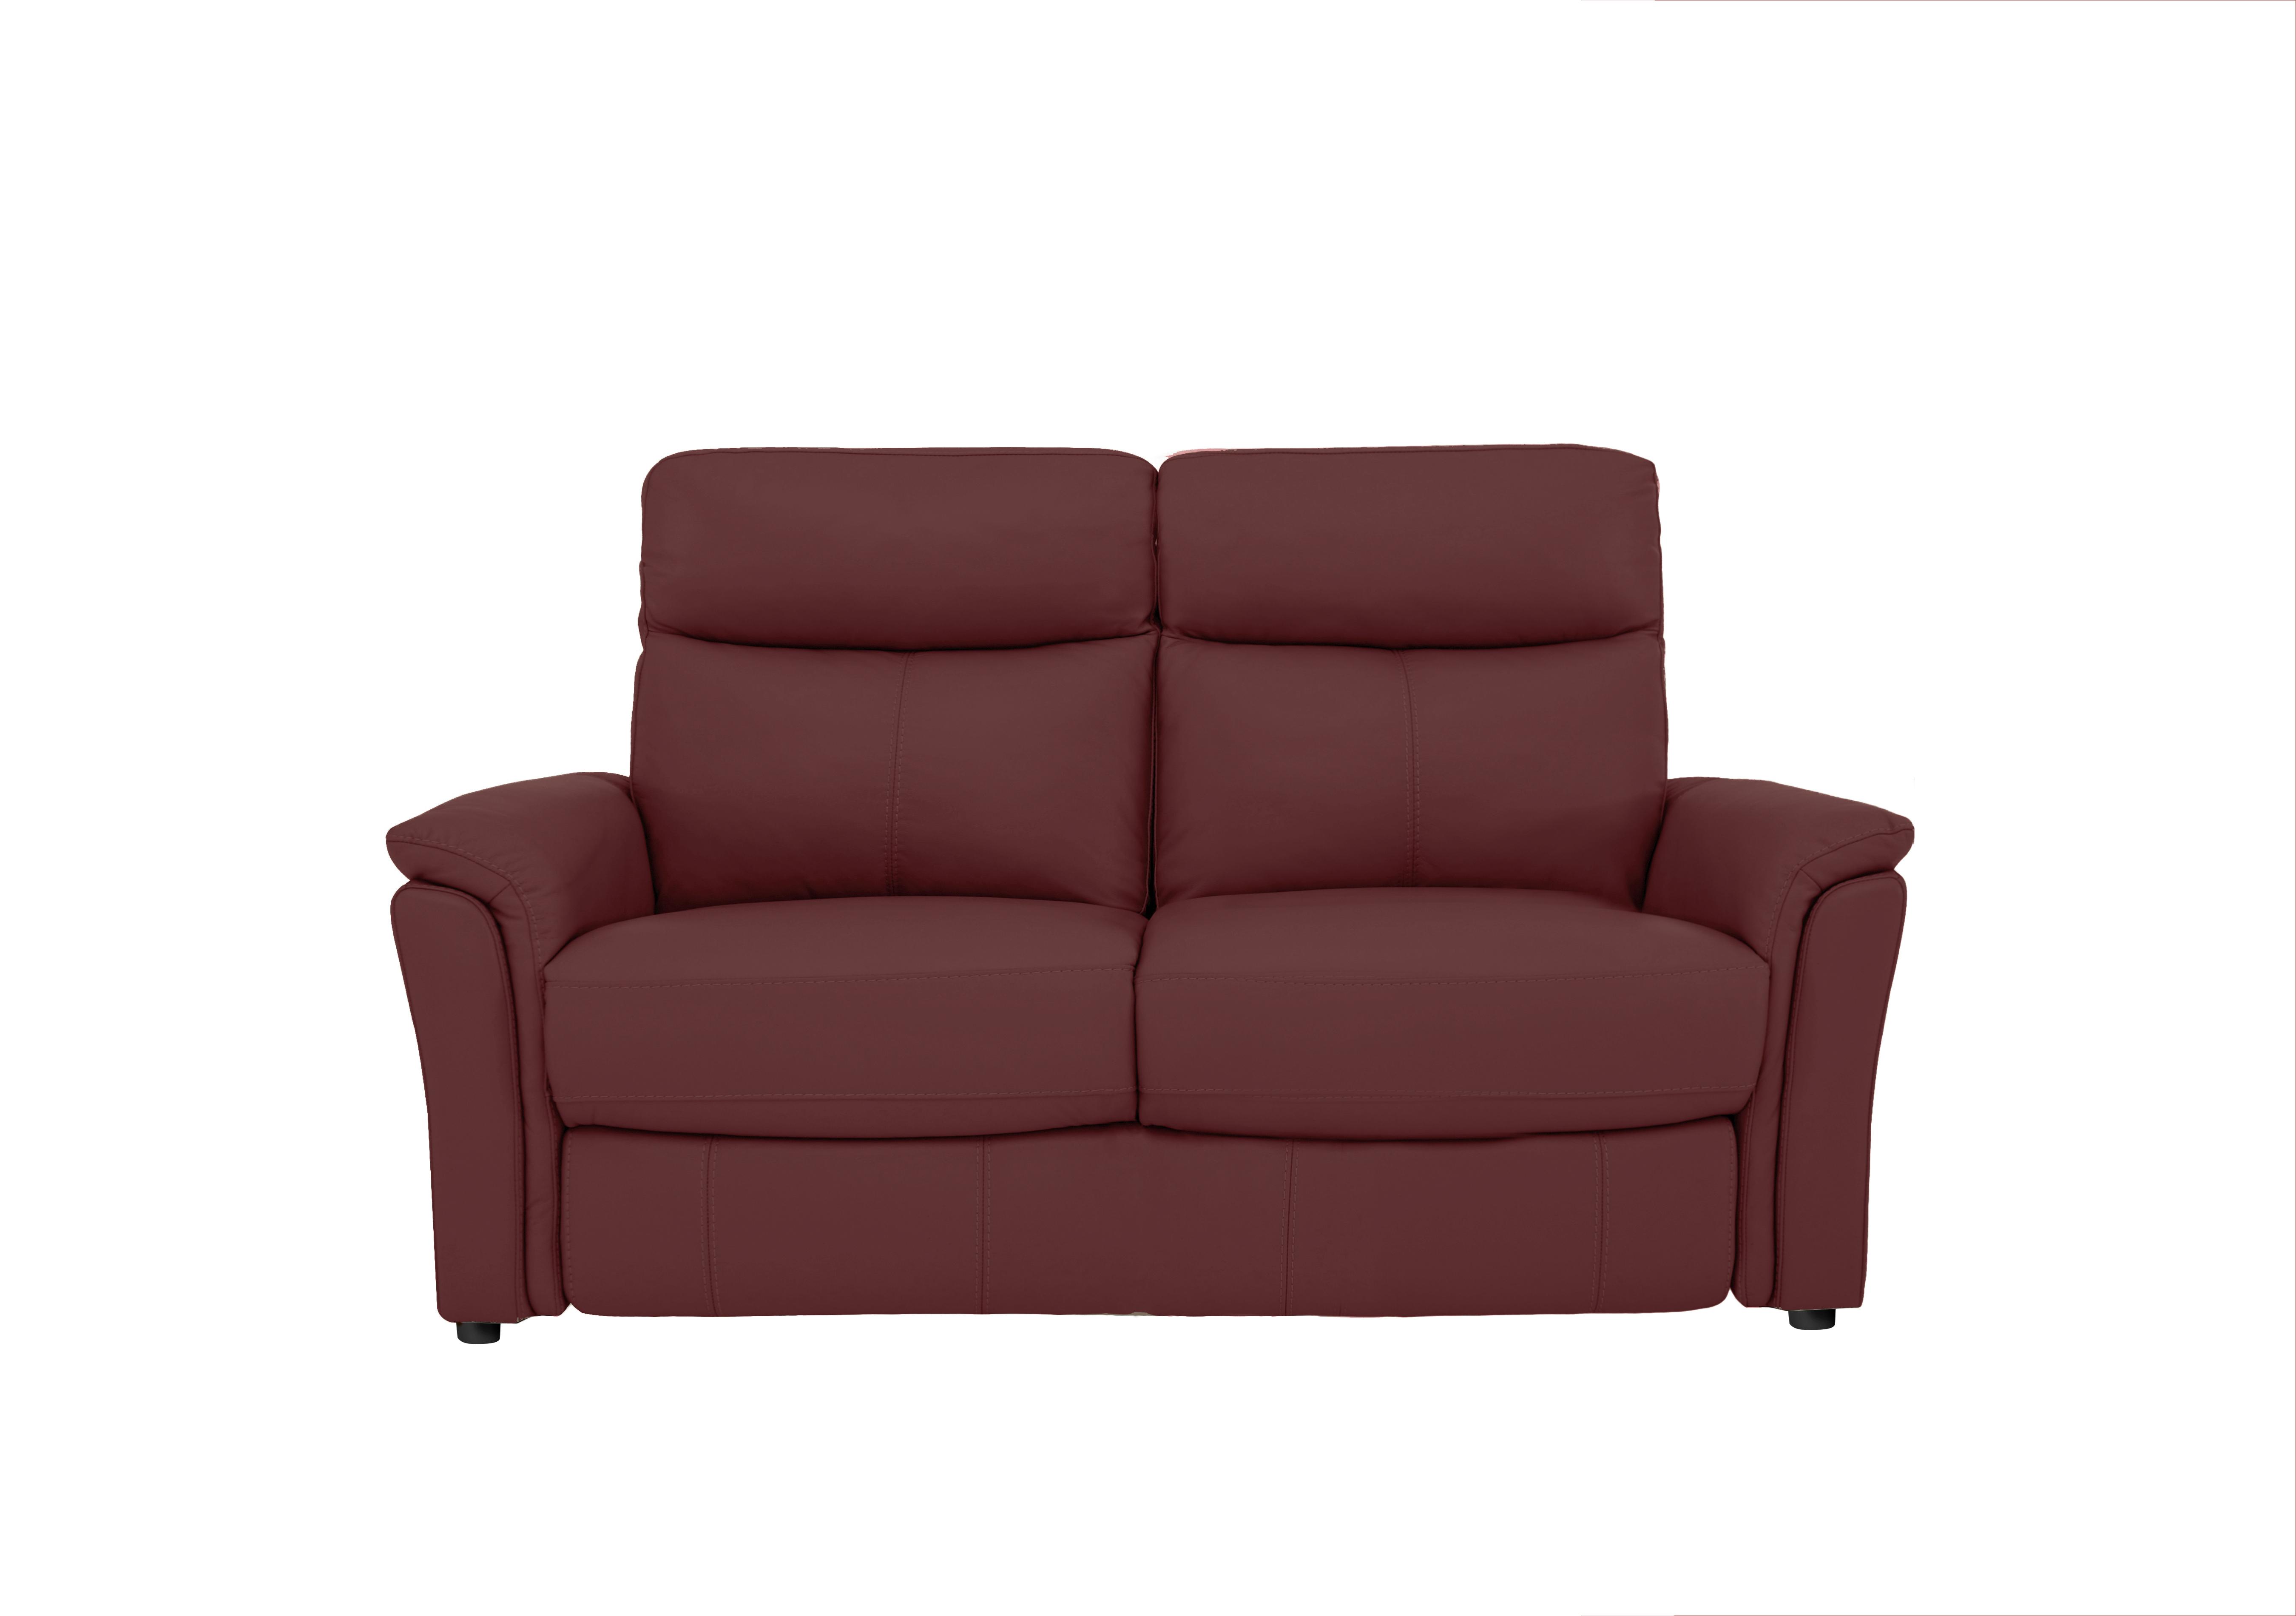 Compact Collection Piccolo 2 Seater Leather Static Sofa in Bv-035c Deep Red on Furniture Village